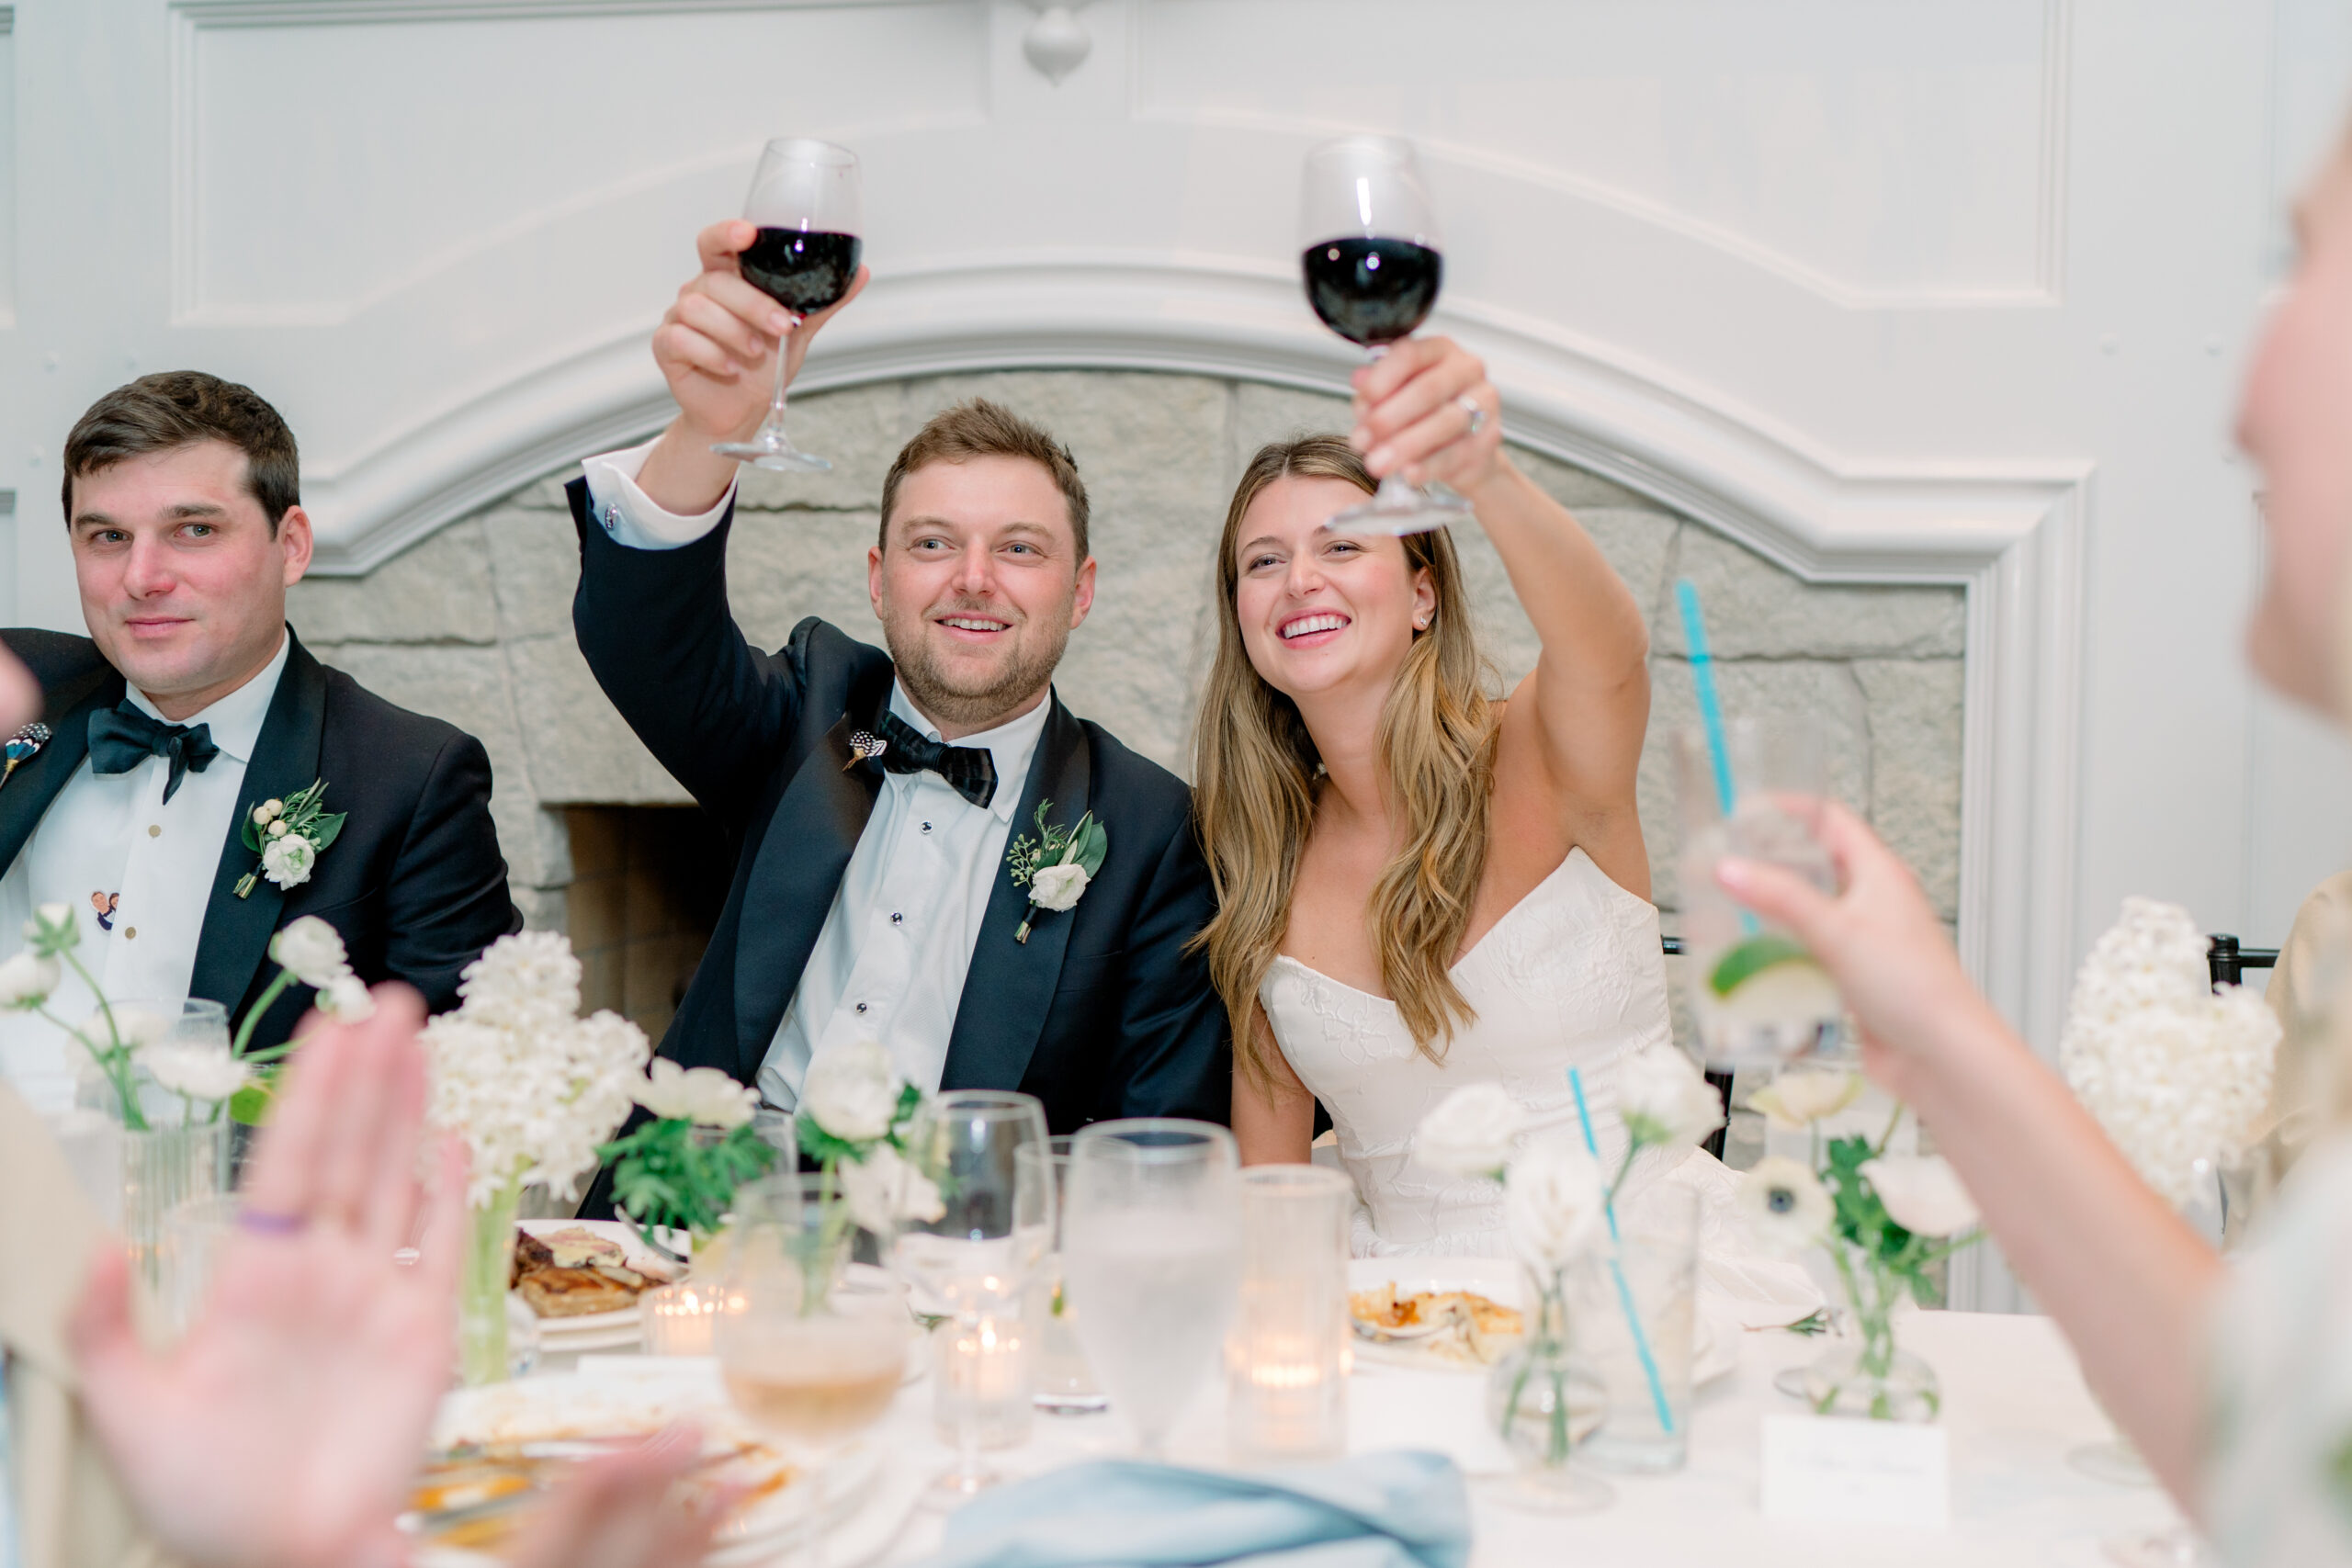 Bride and groom raise a glass during speeches at wedding reception. 